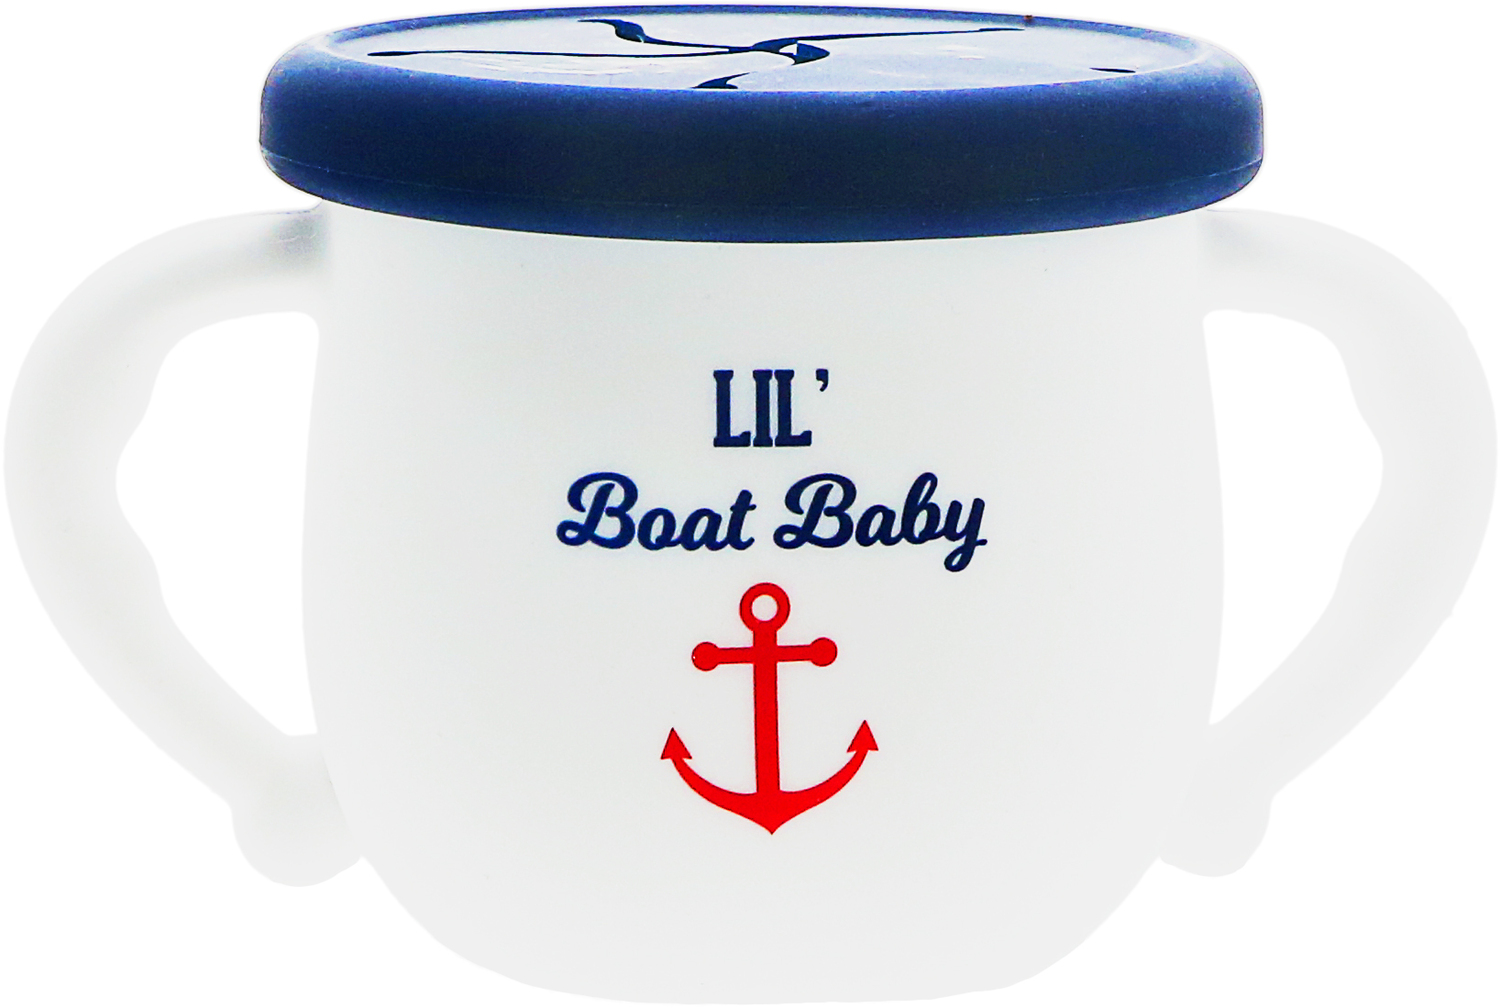 Boat Baby by We Baby - Boat Baby - 3.5" Silicone Snack Bowl with Lid